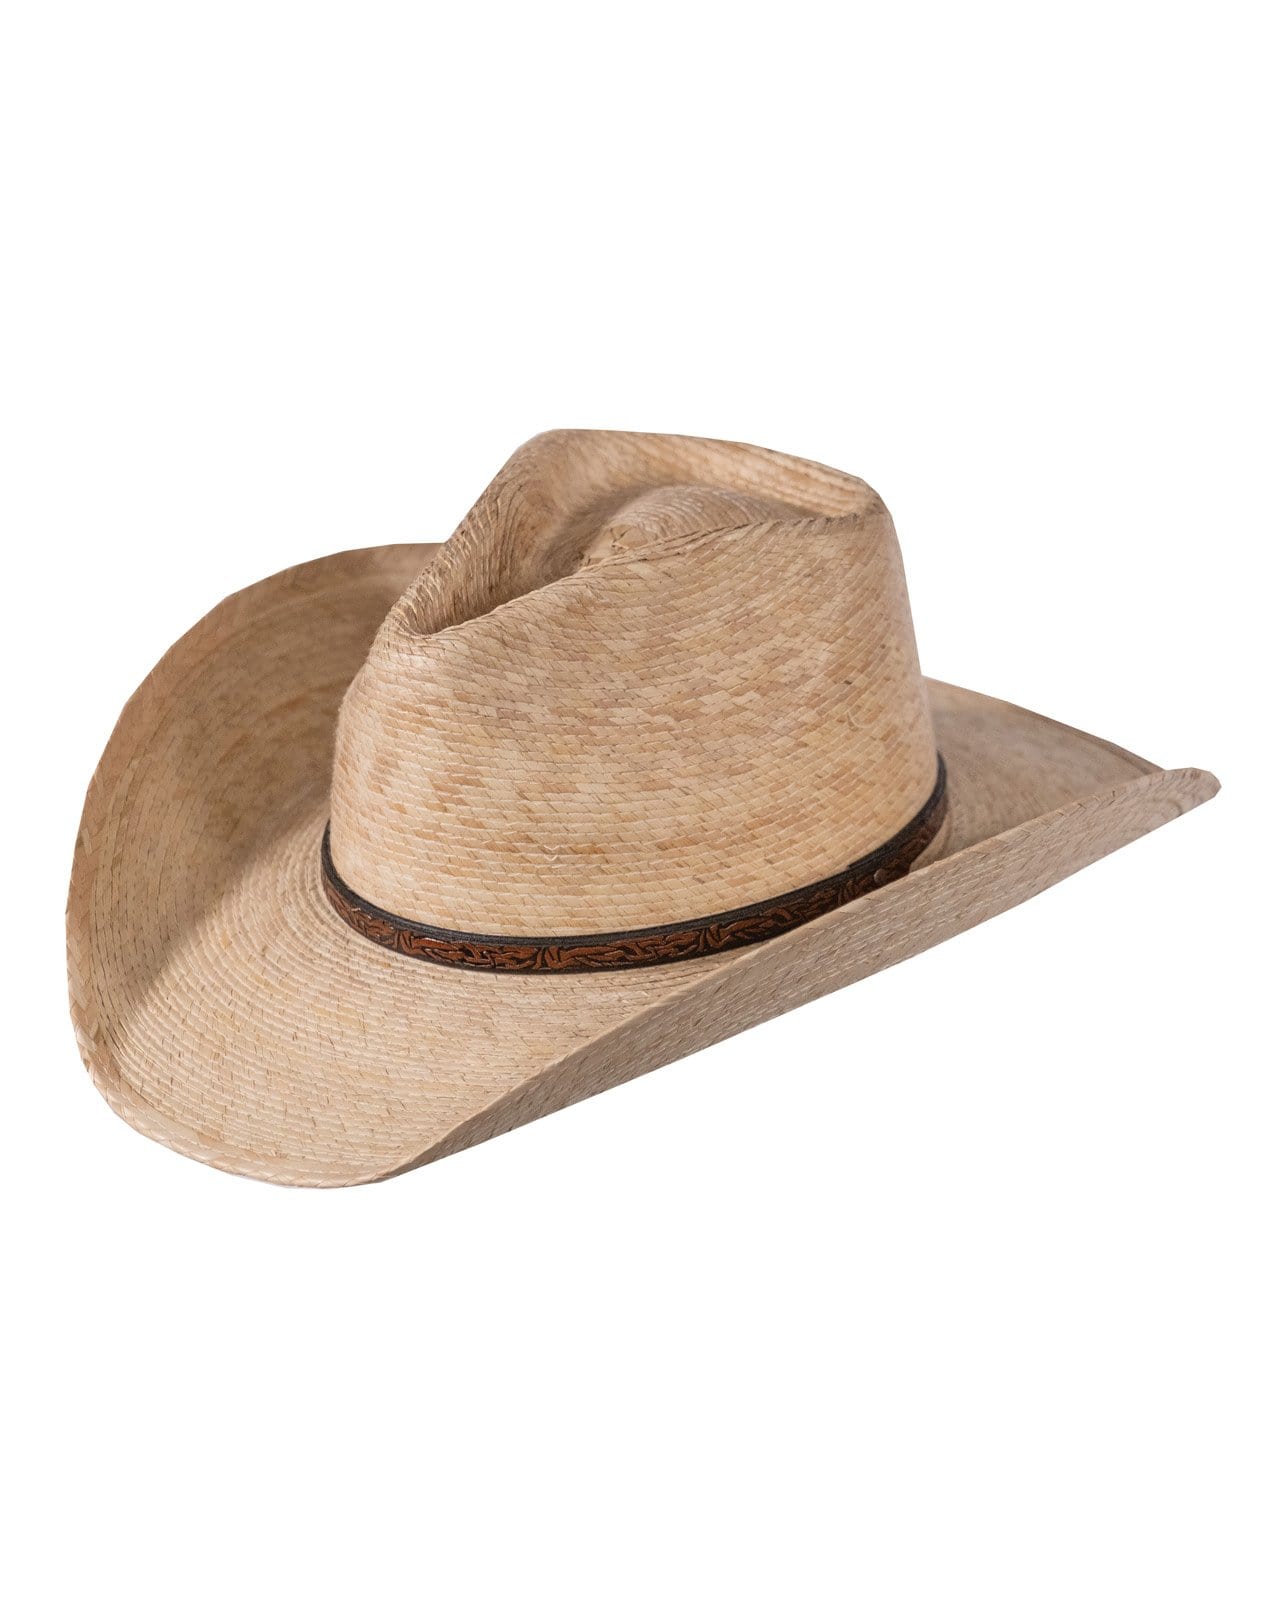 Outback Trading Co Palm Collection Rio Straw Hat